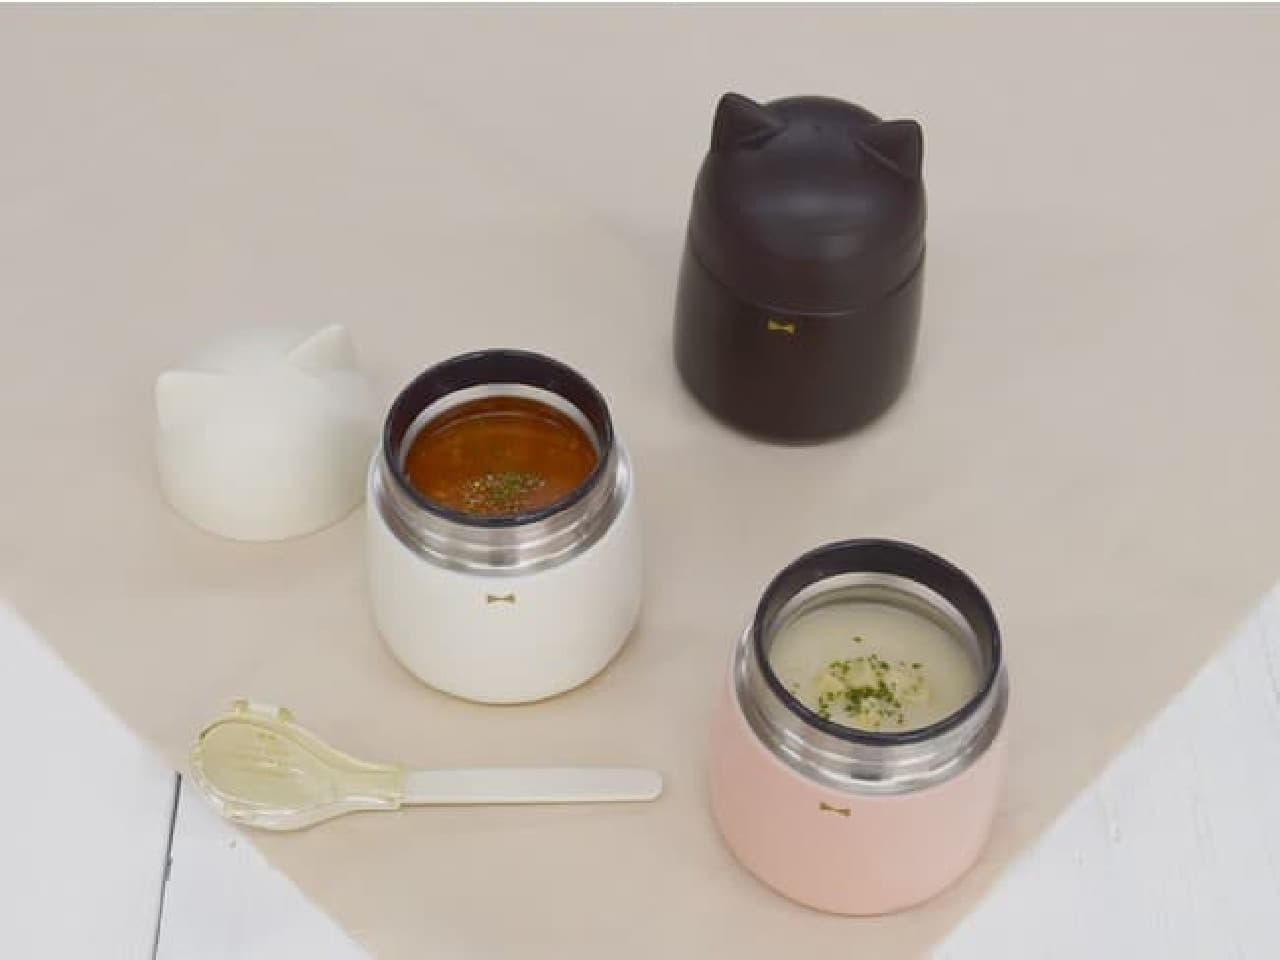 Released "Shaton Nekomimi Stainless Soup Pot" --Stainless steel soup pot with cute cat ears